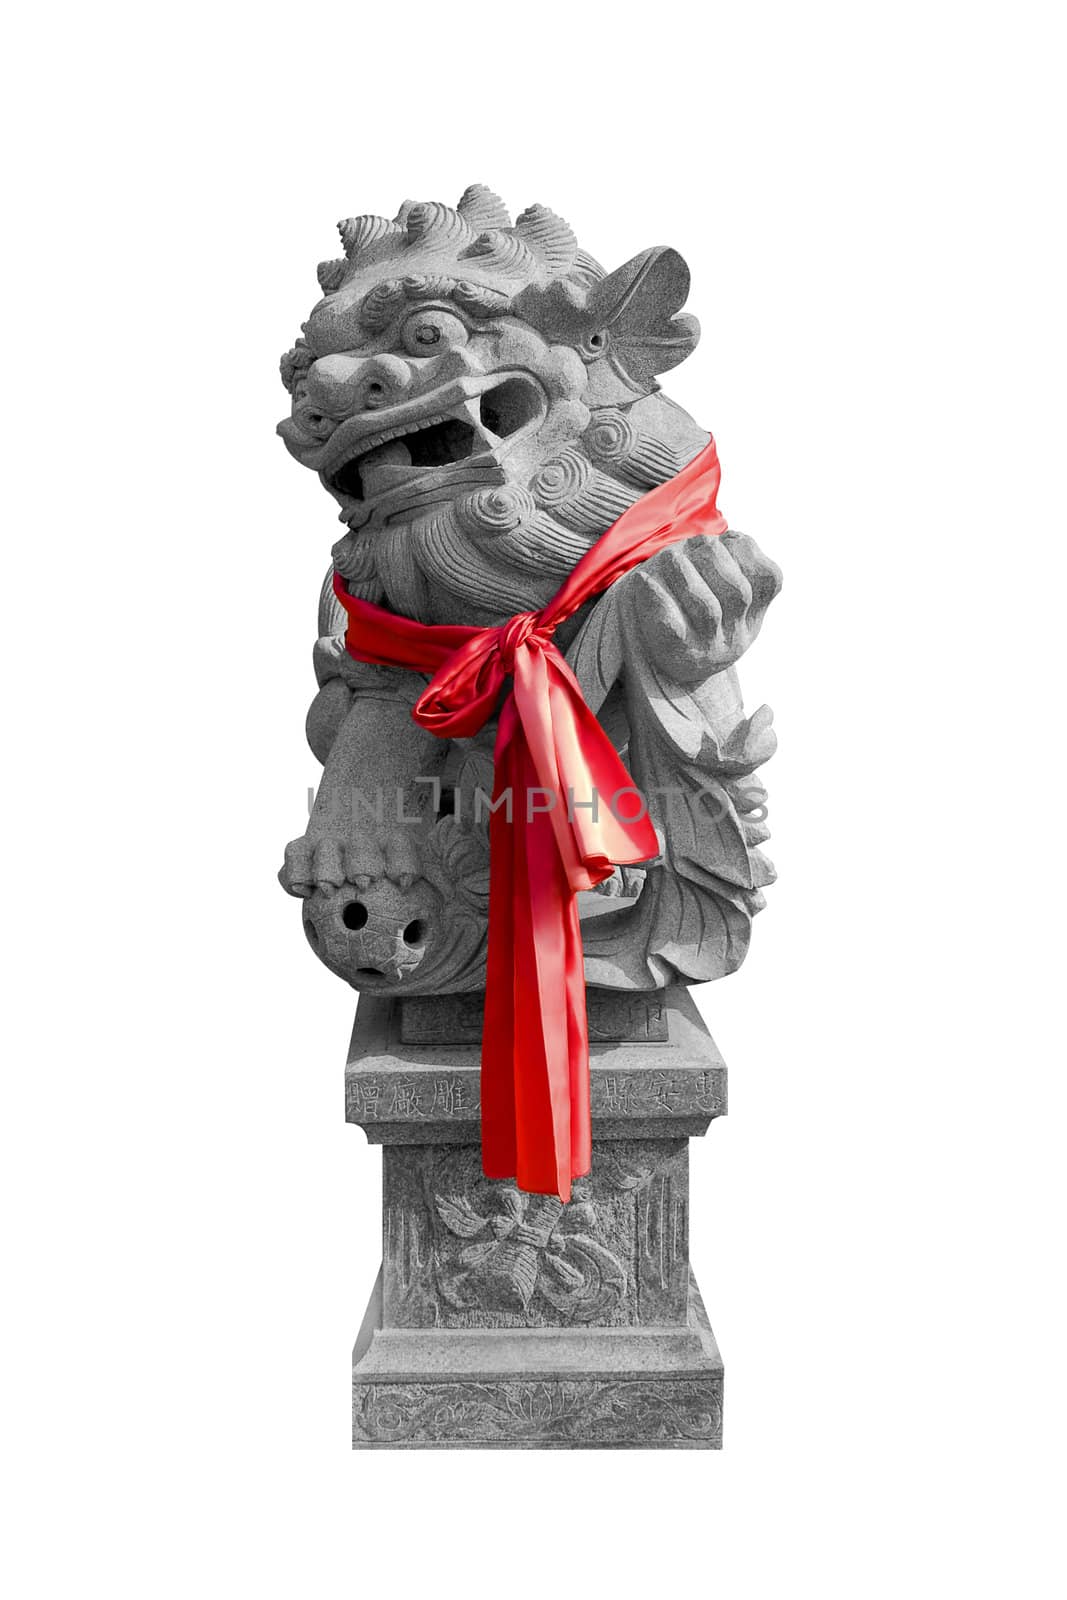 Chinese Guardian Lion Statue by tfjunction